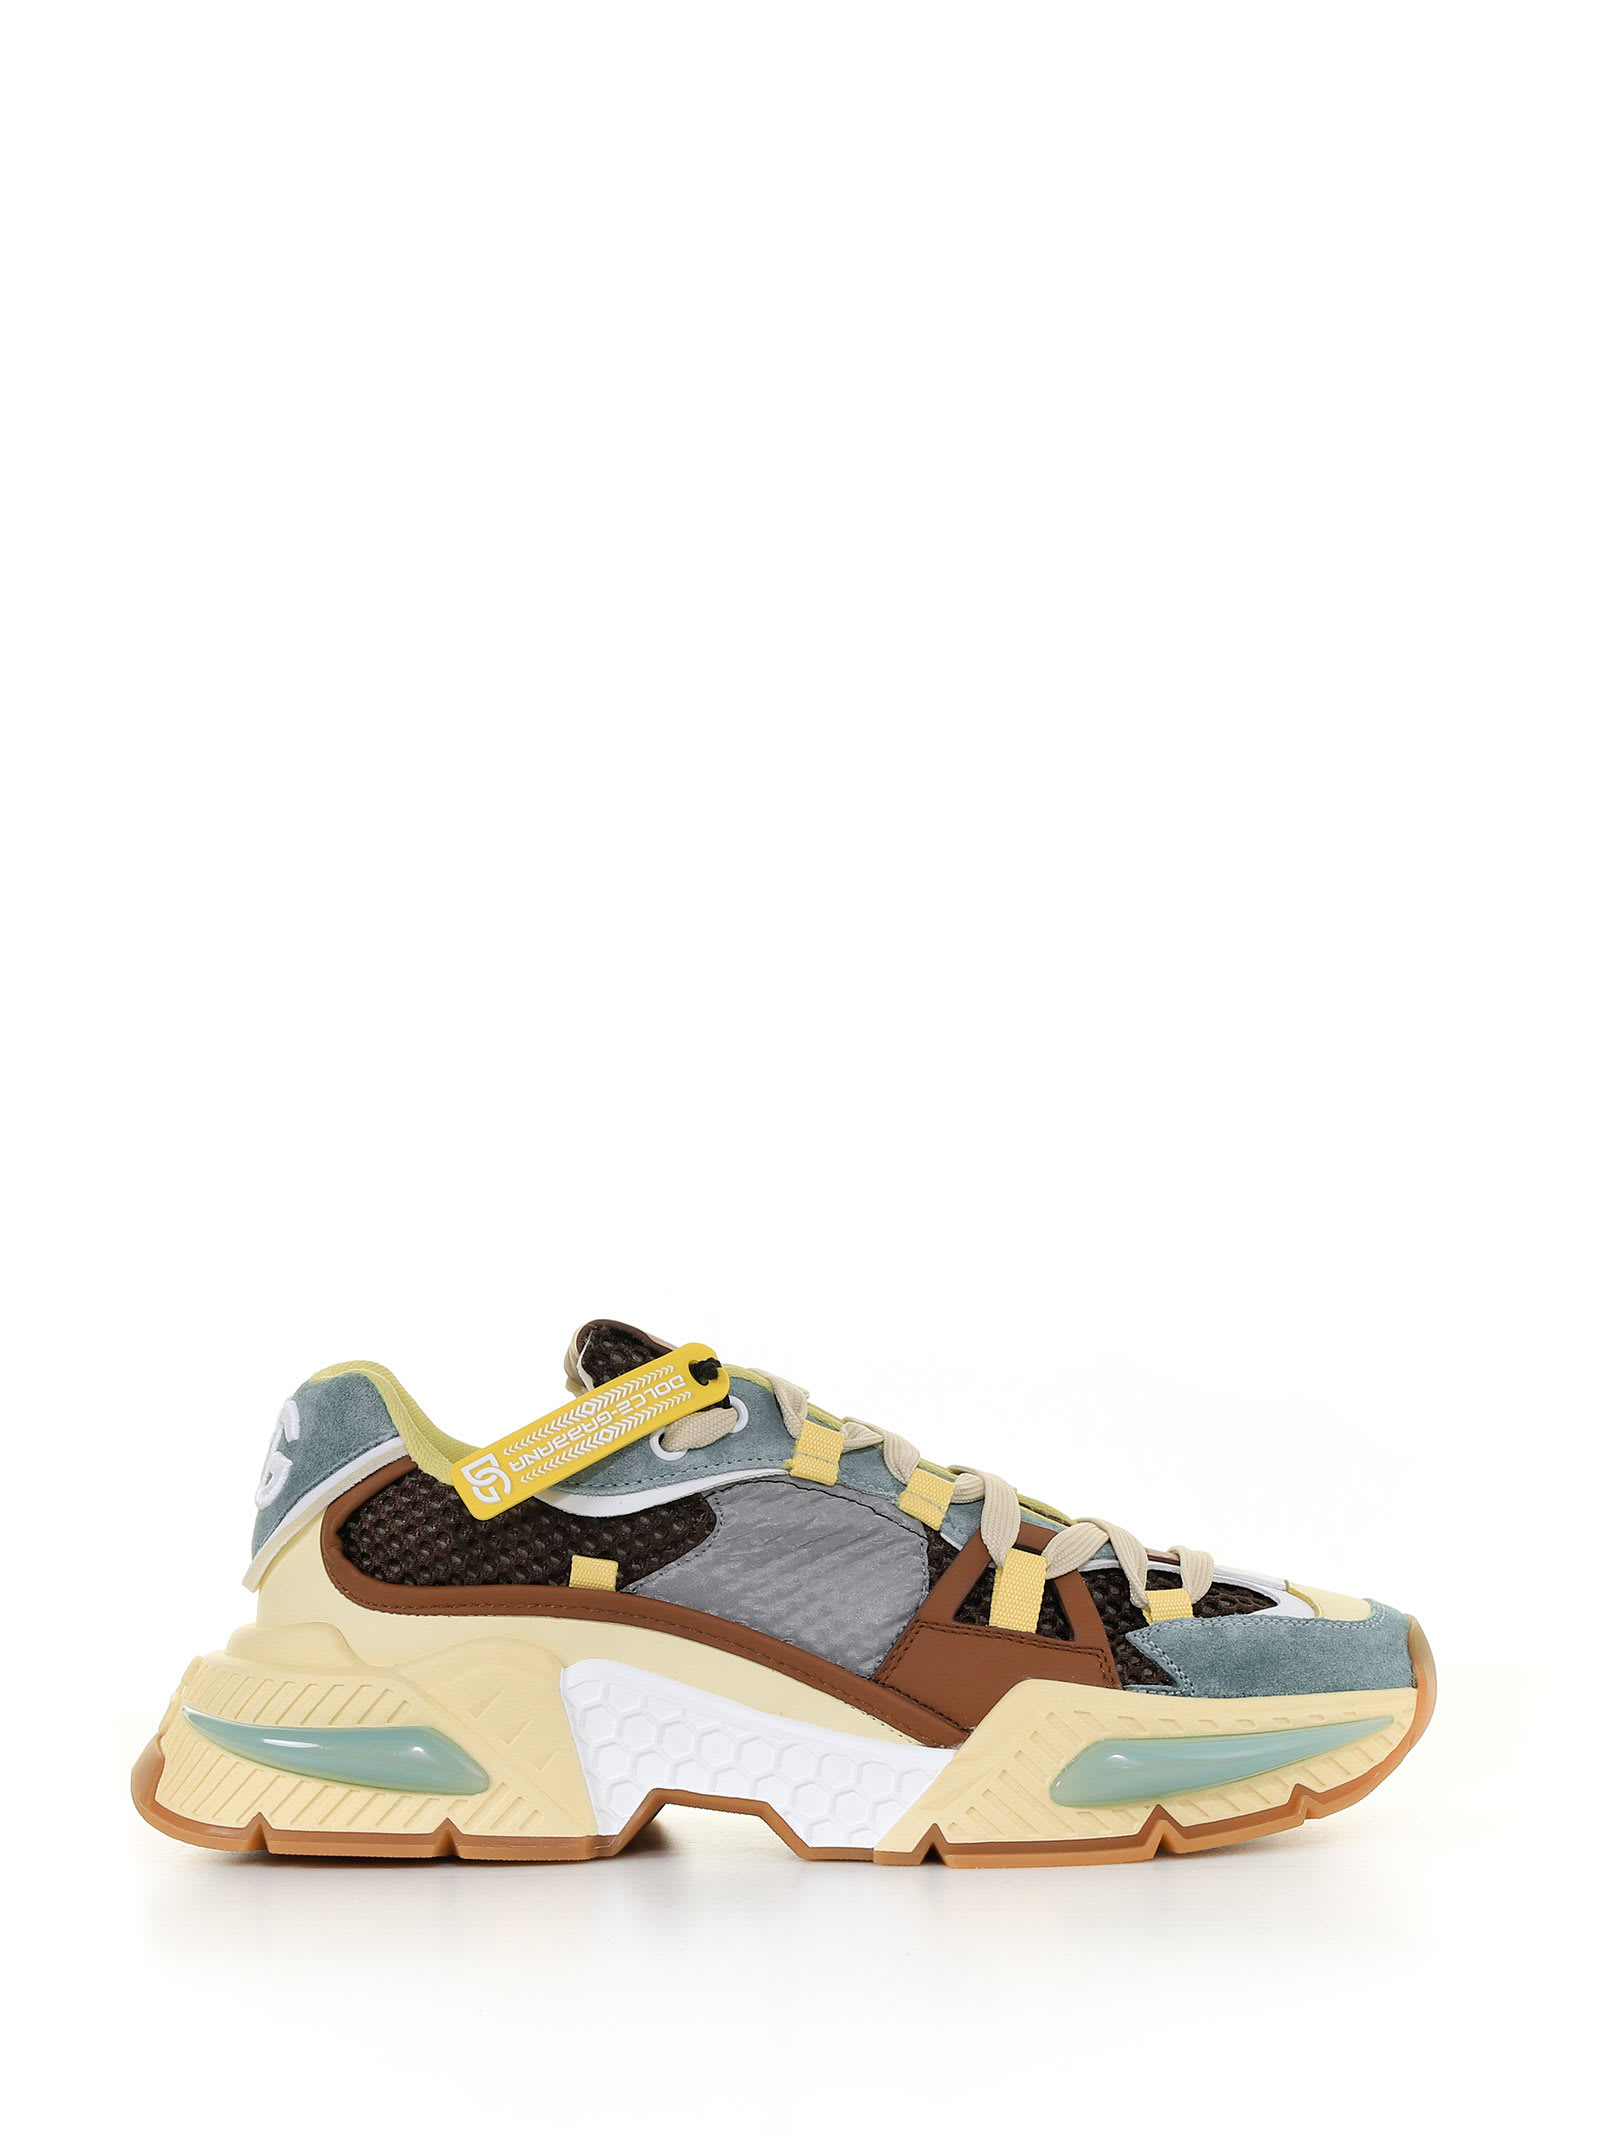 DOLCE & GABBANA AIRMASTER SNEAKER IN A MIX OF MATERIALS